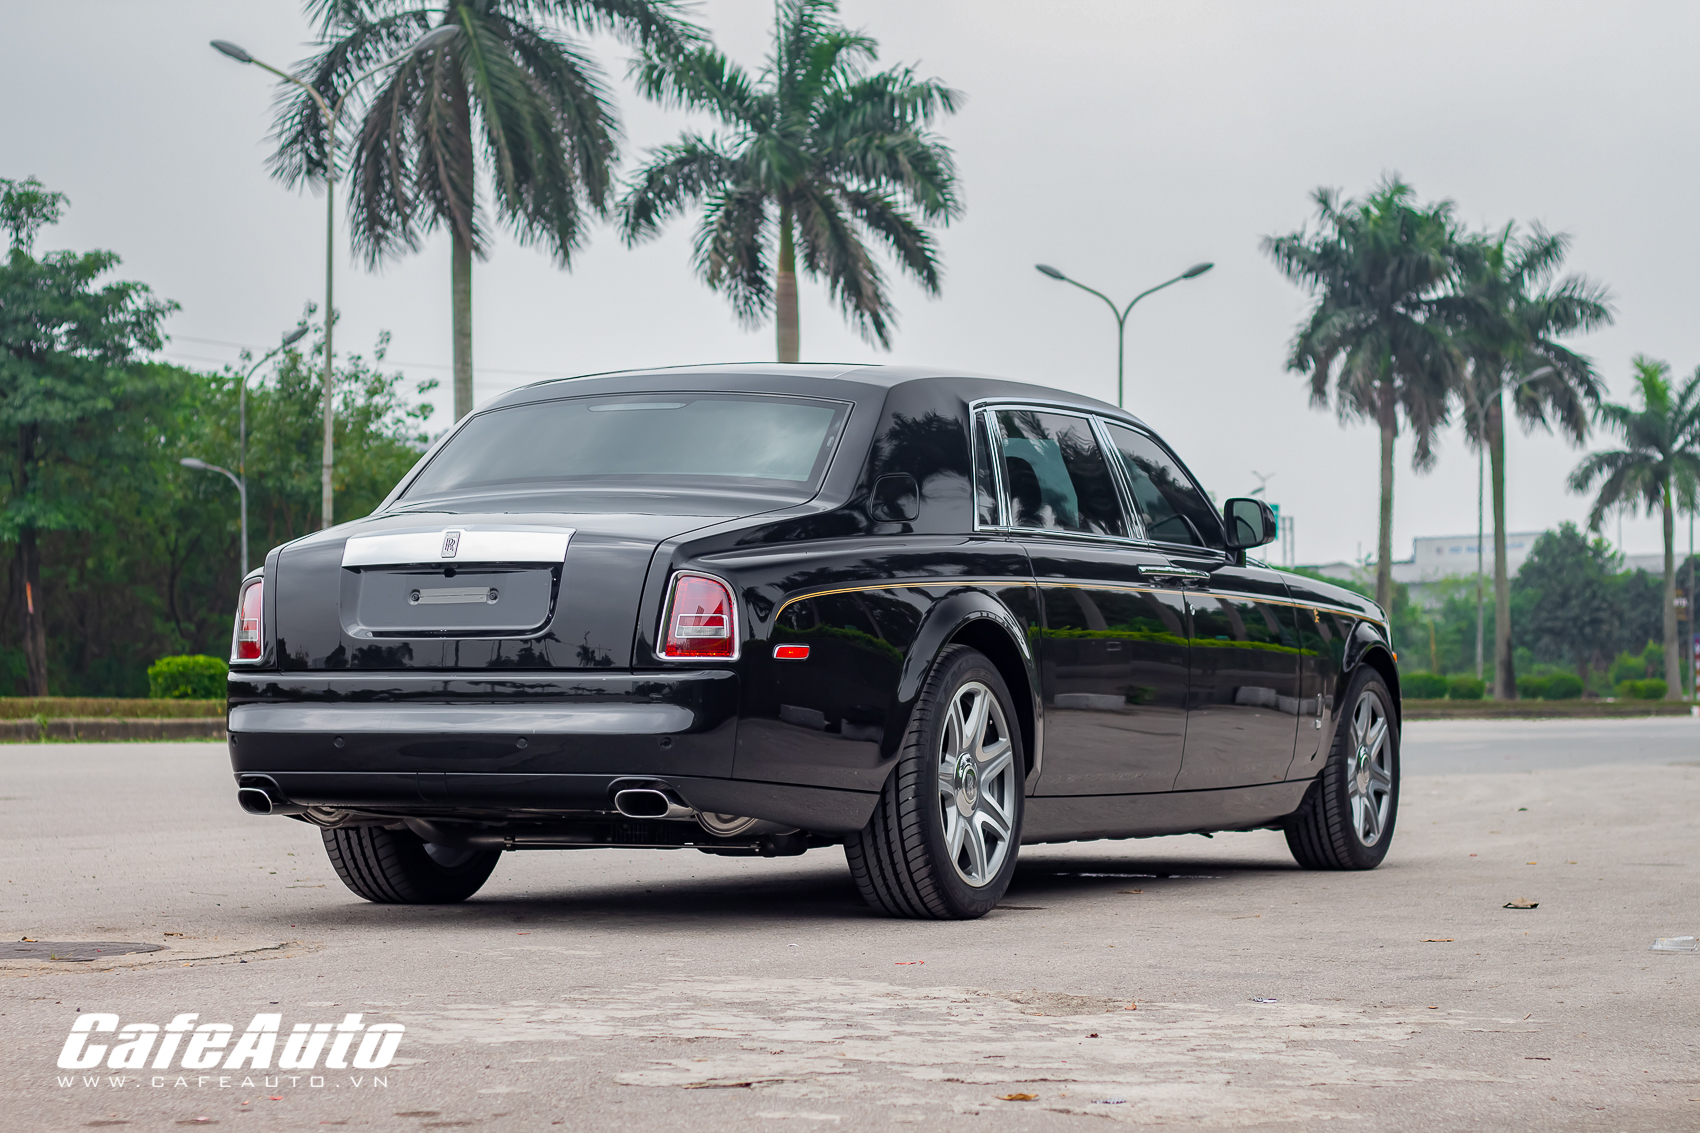 Used 2012 RollsRoyce Ghost Extended Wheel Base For Sale Sold  FC  Kerbeck Stock 17R104AJI